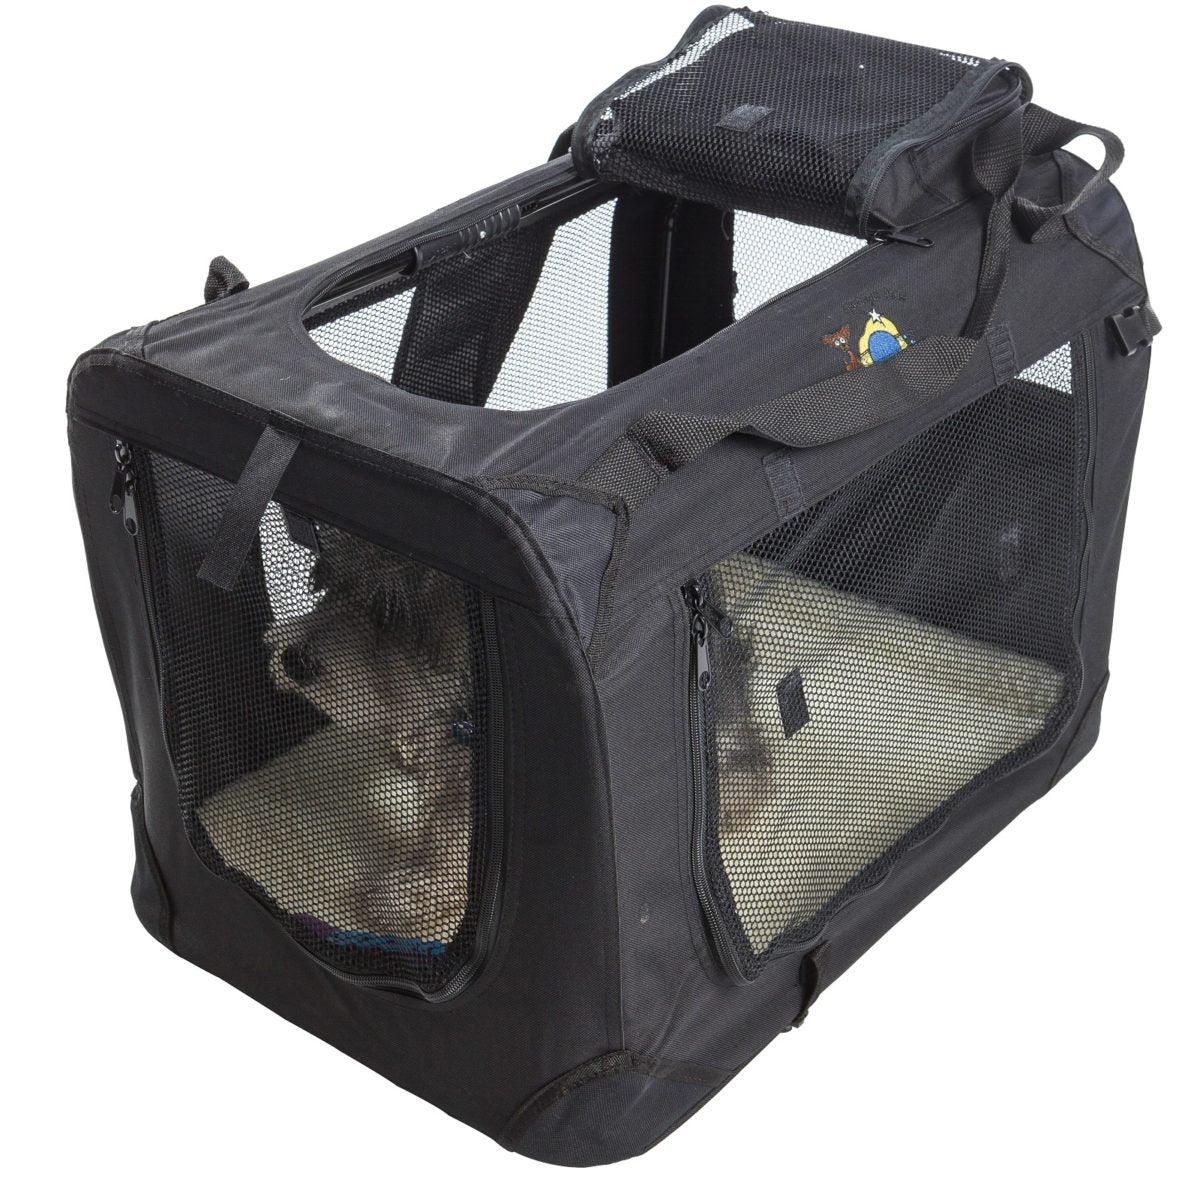 Cosmic Pets Collapsible Pet Carrier Black - Collapsible Carriers